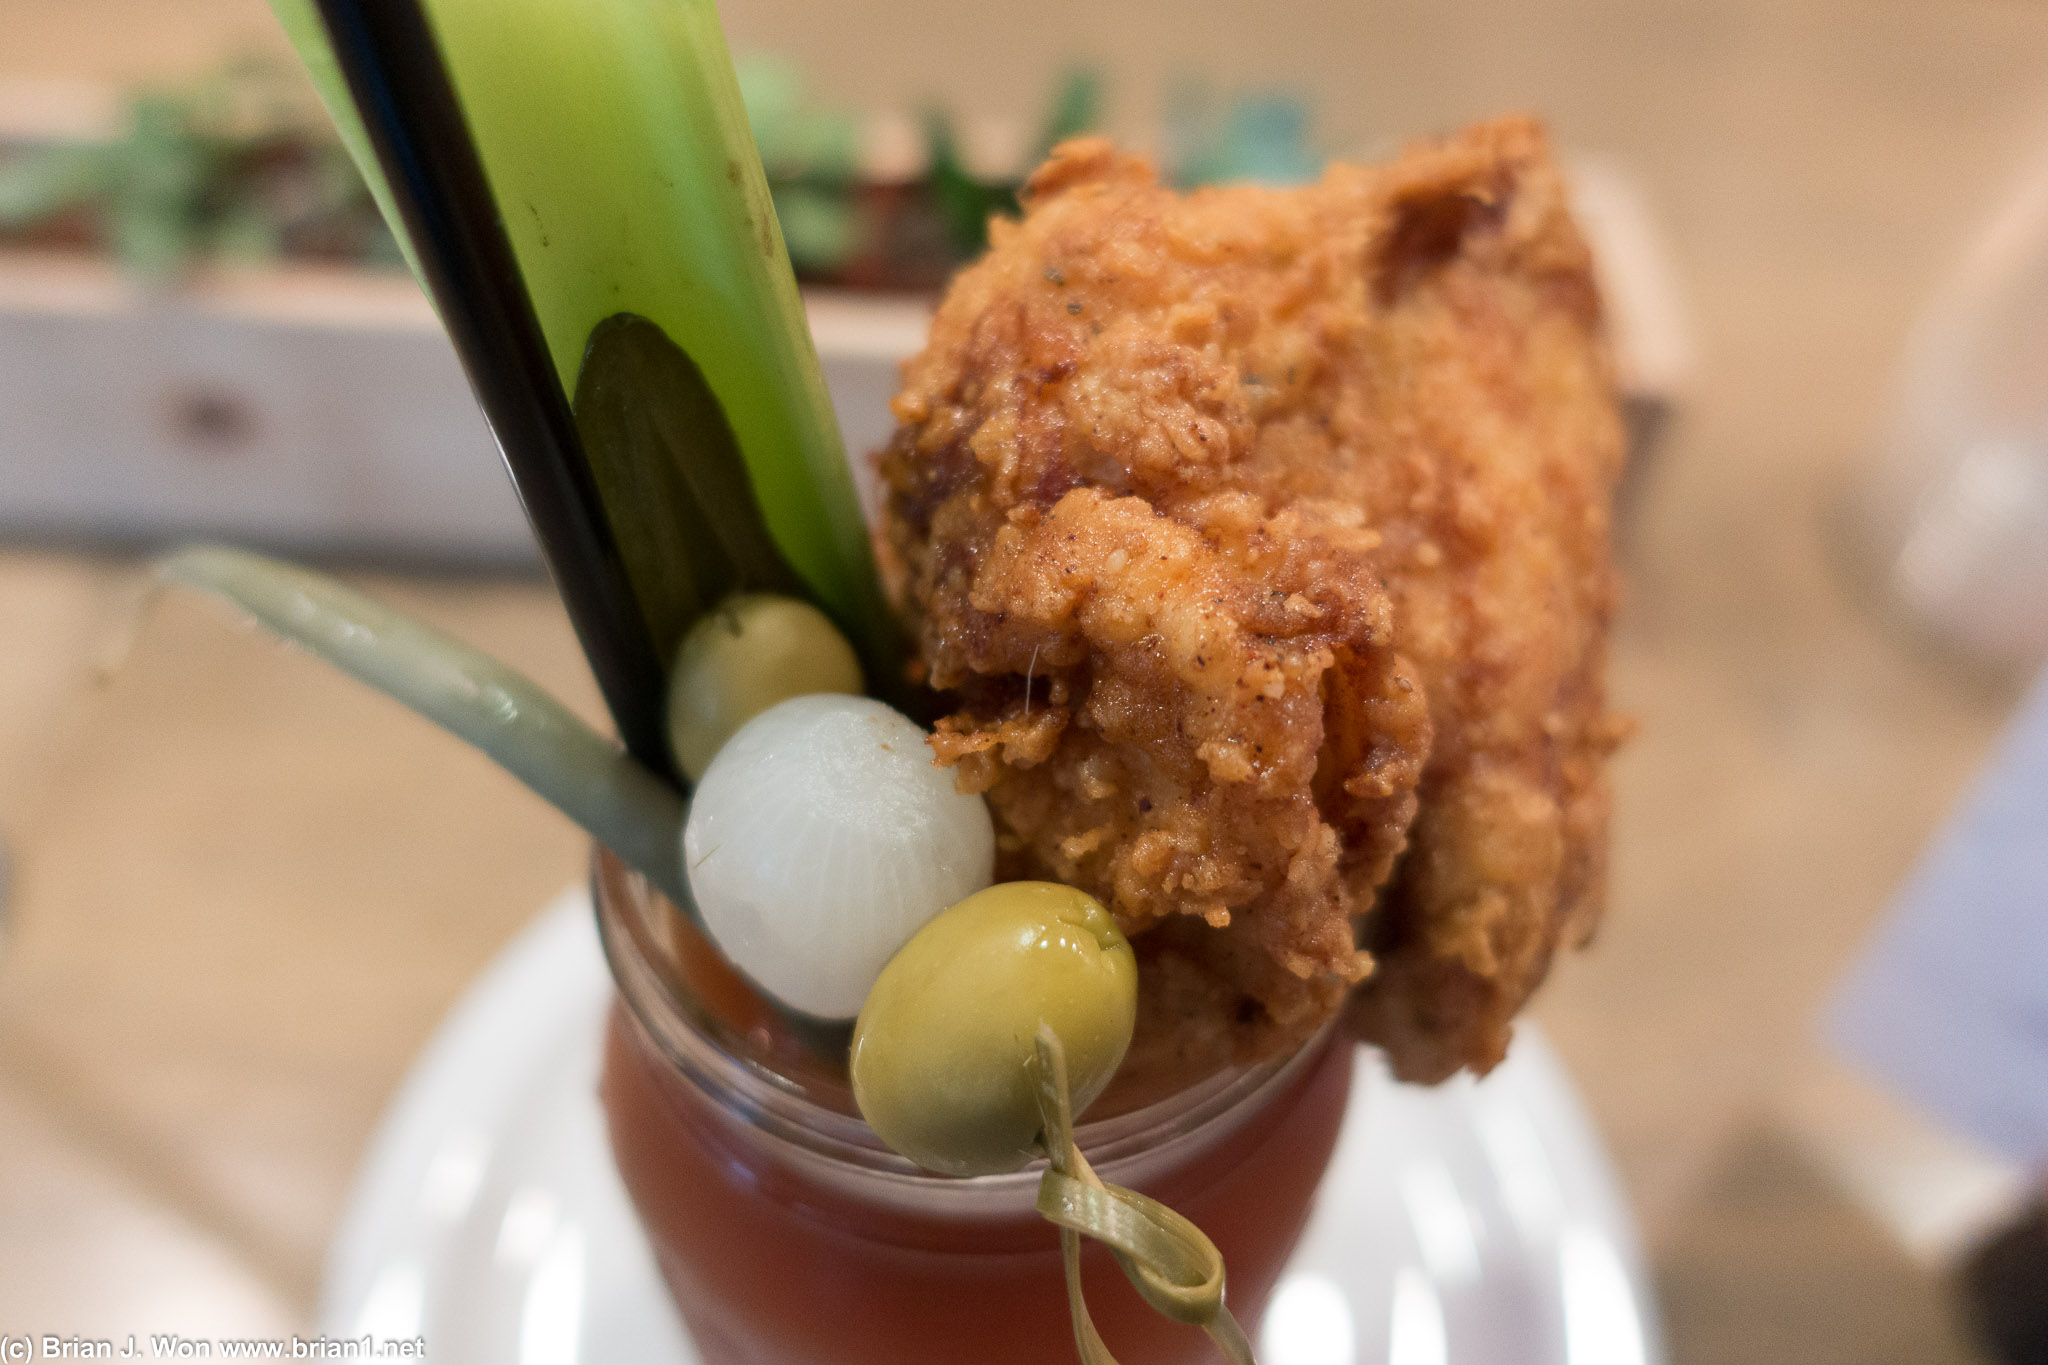 New levels of absurd: a fried chicken bloody mary.